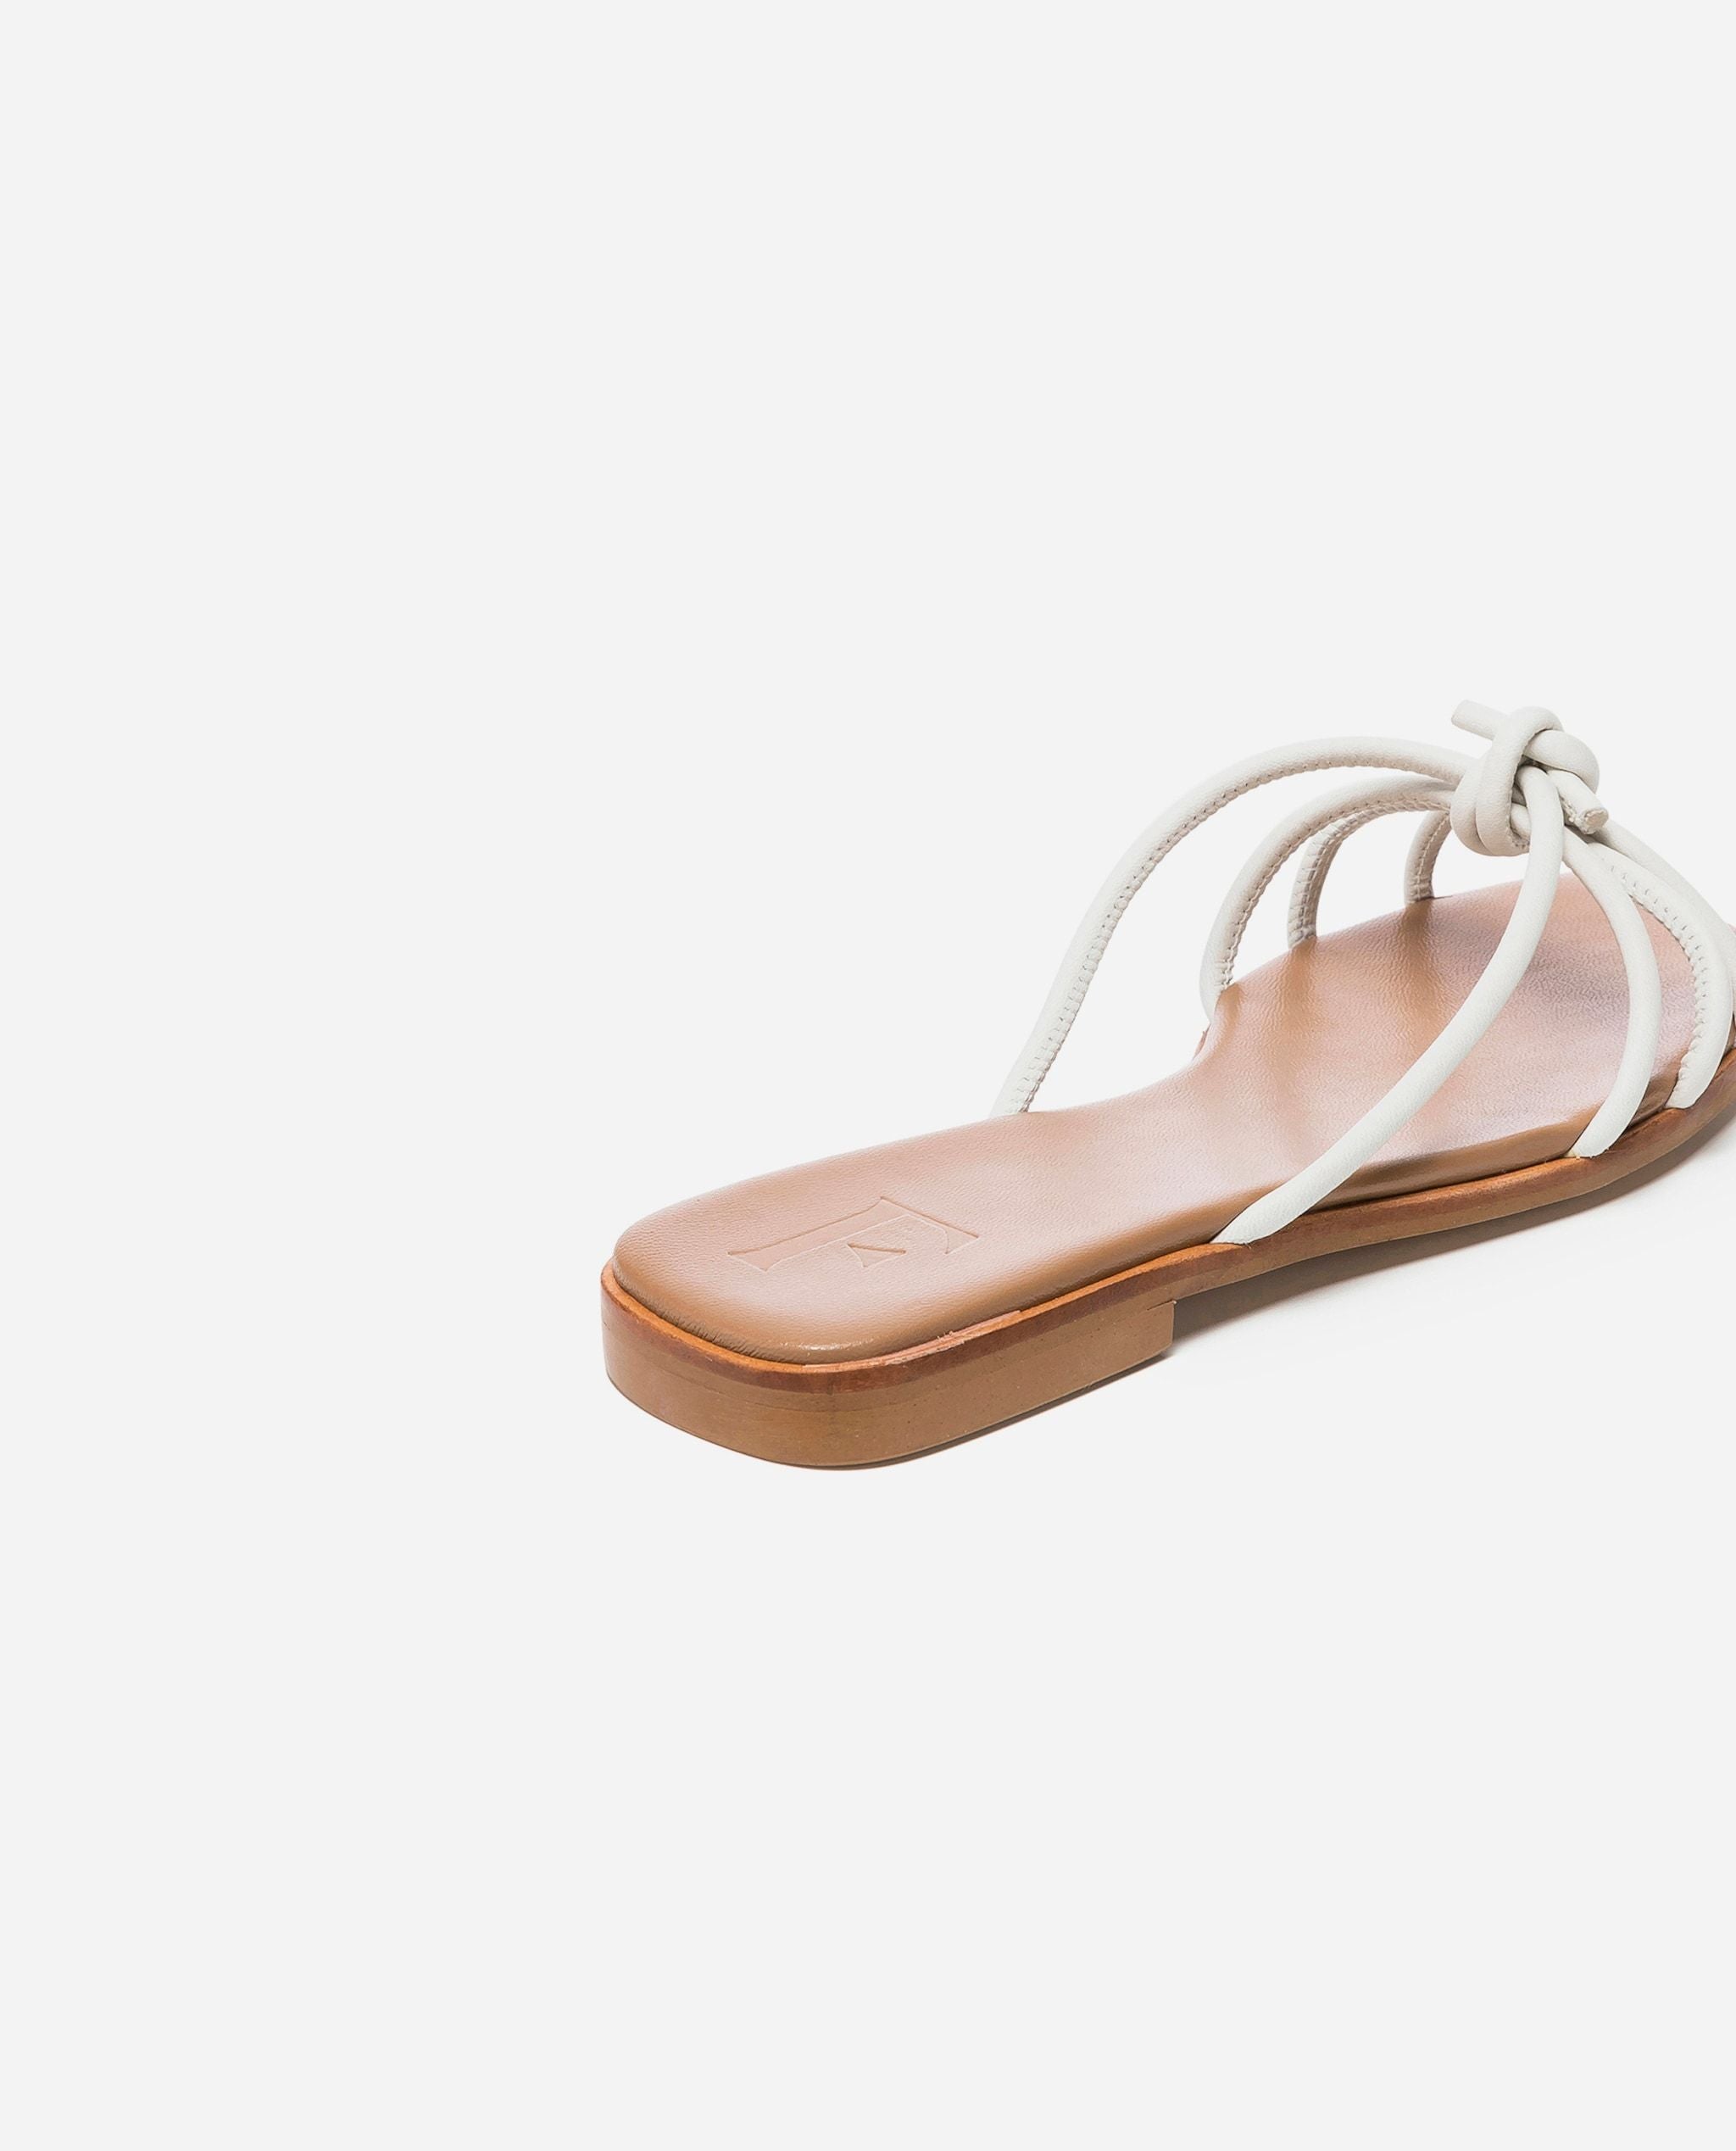 Yvette Leather Off White Flat Sandals Flats 19010700801-008 - 6